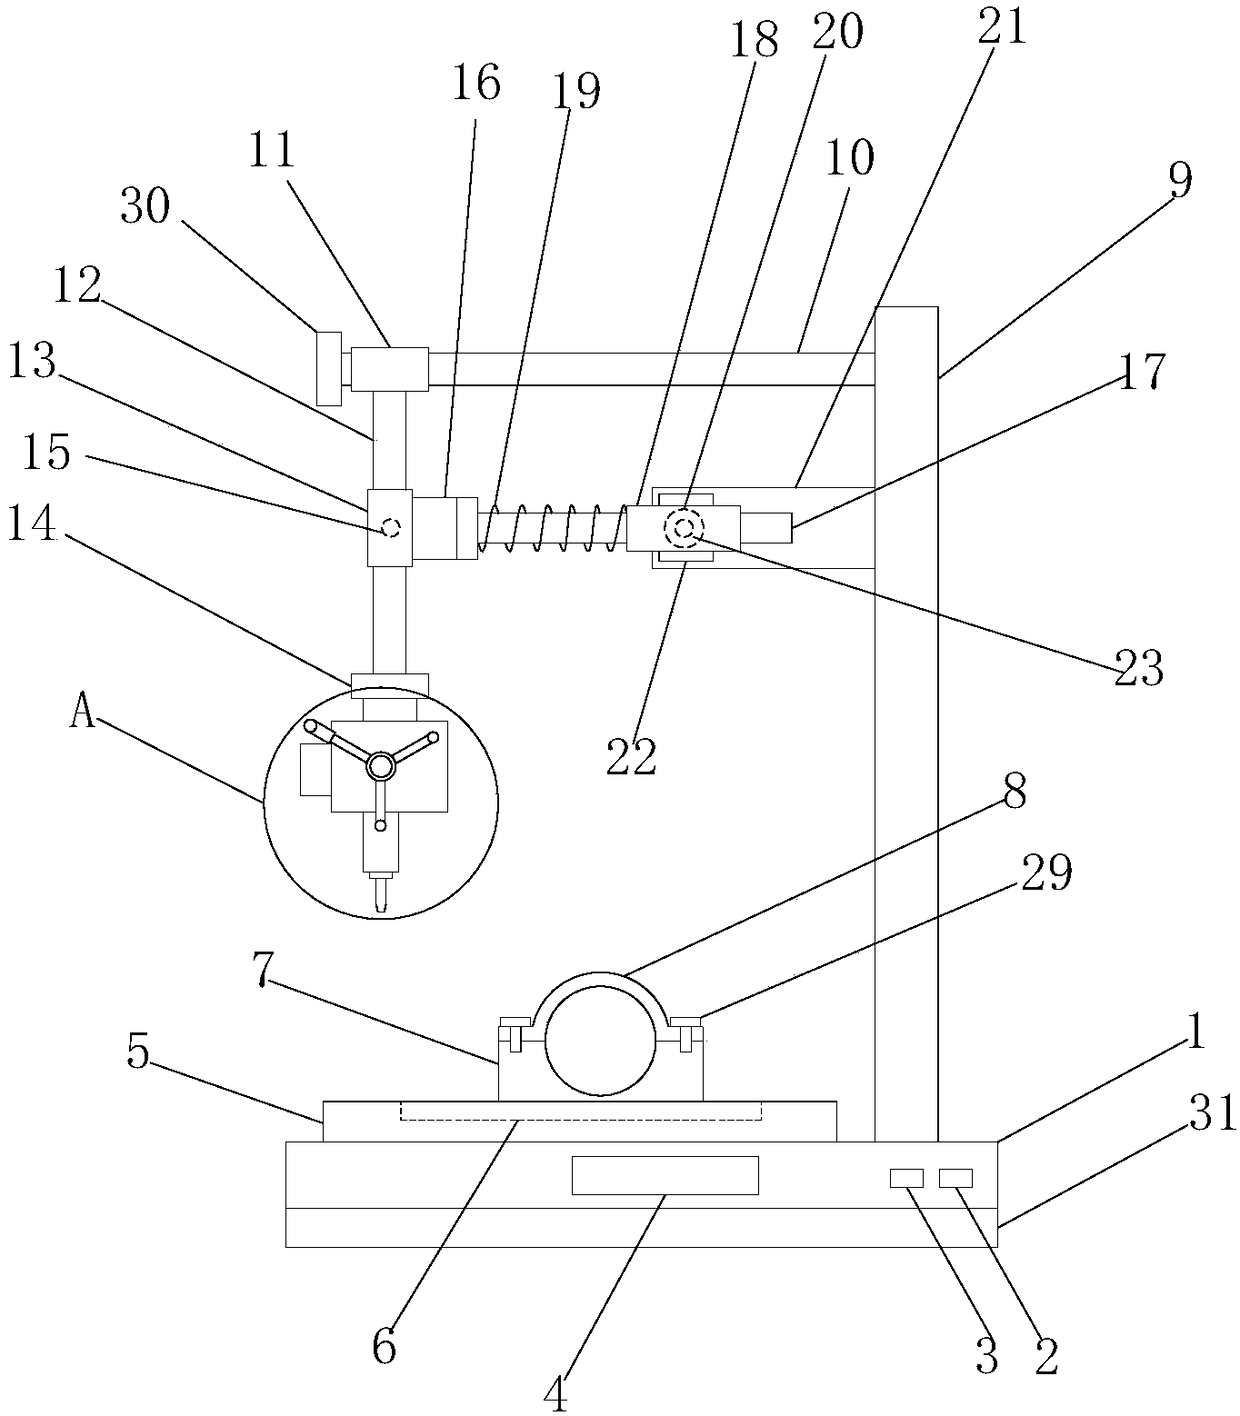 Orthopedic perforating device capable of precisely positioning